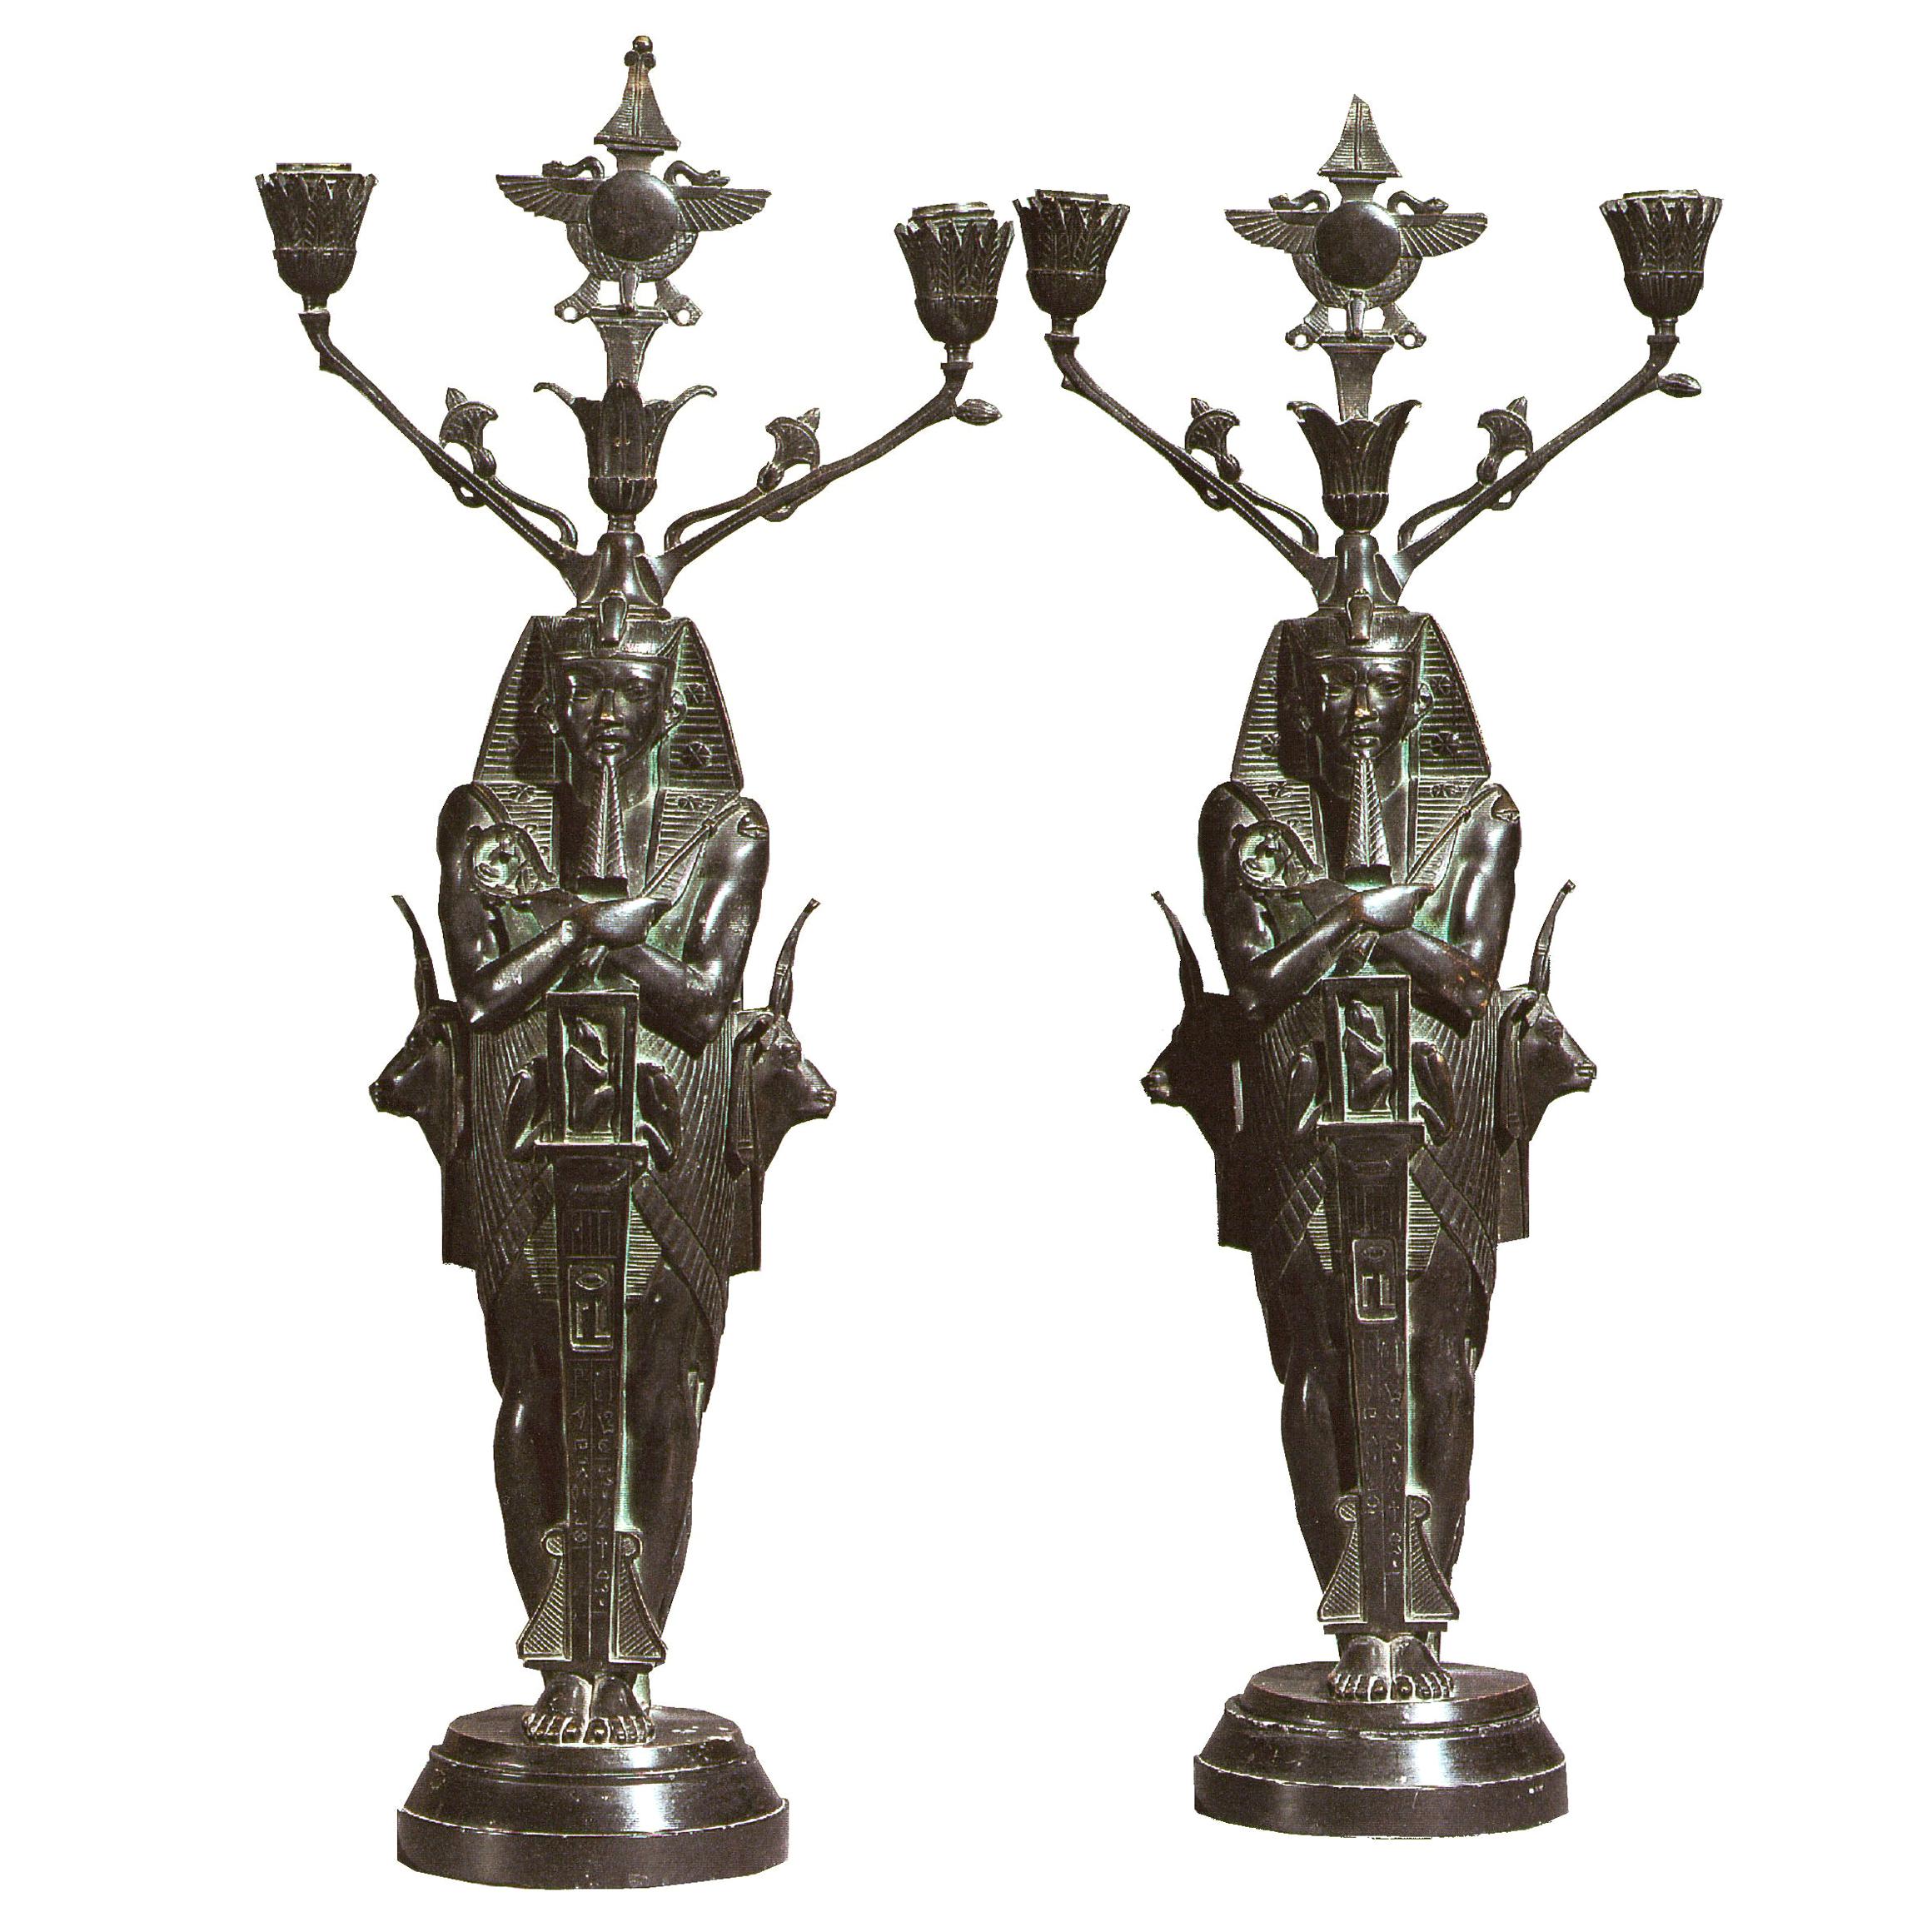 Unusual Pair of Egyptian Revival Candelabra, 19th Century